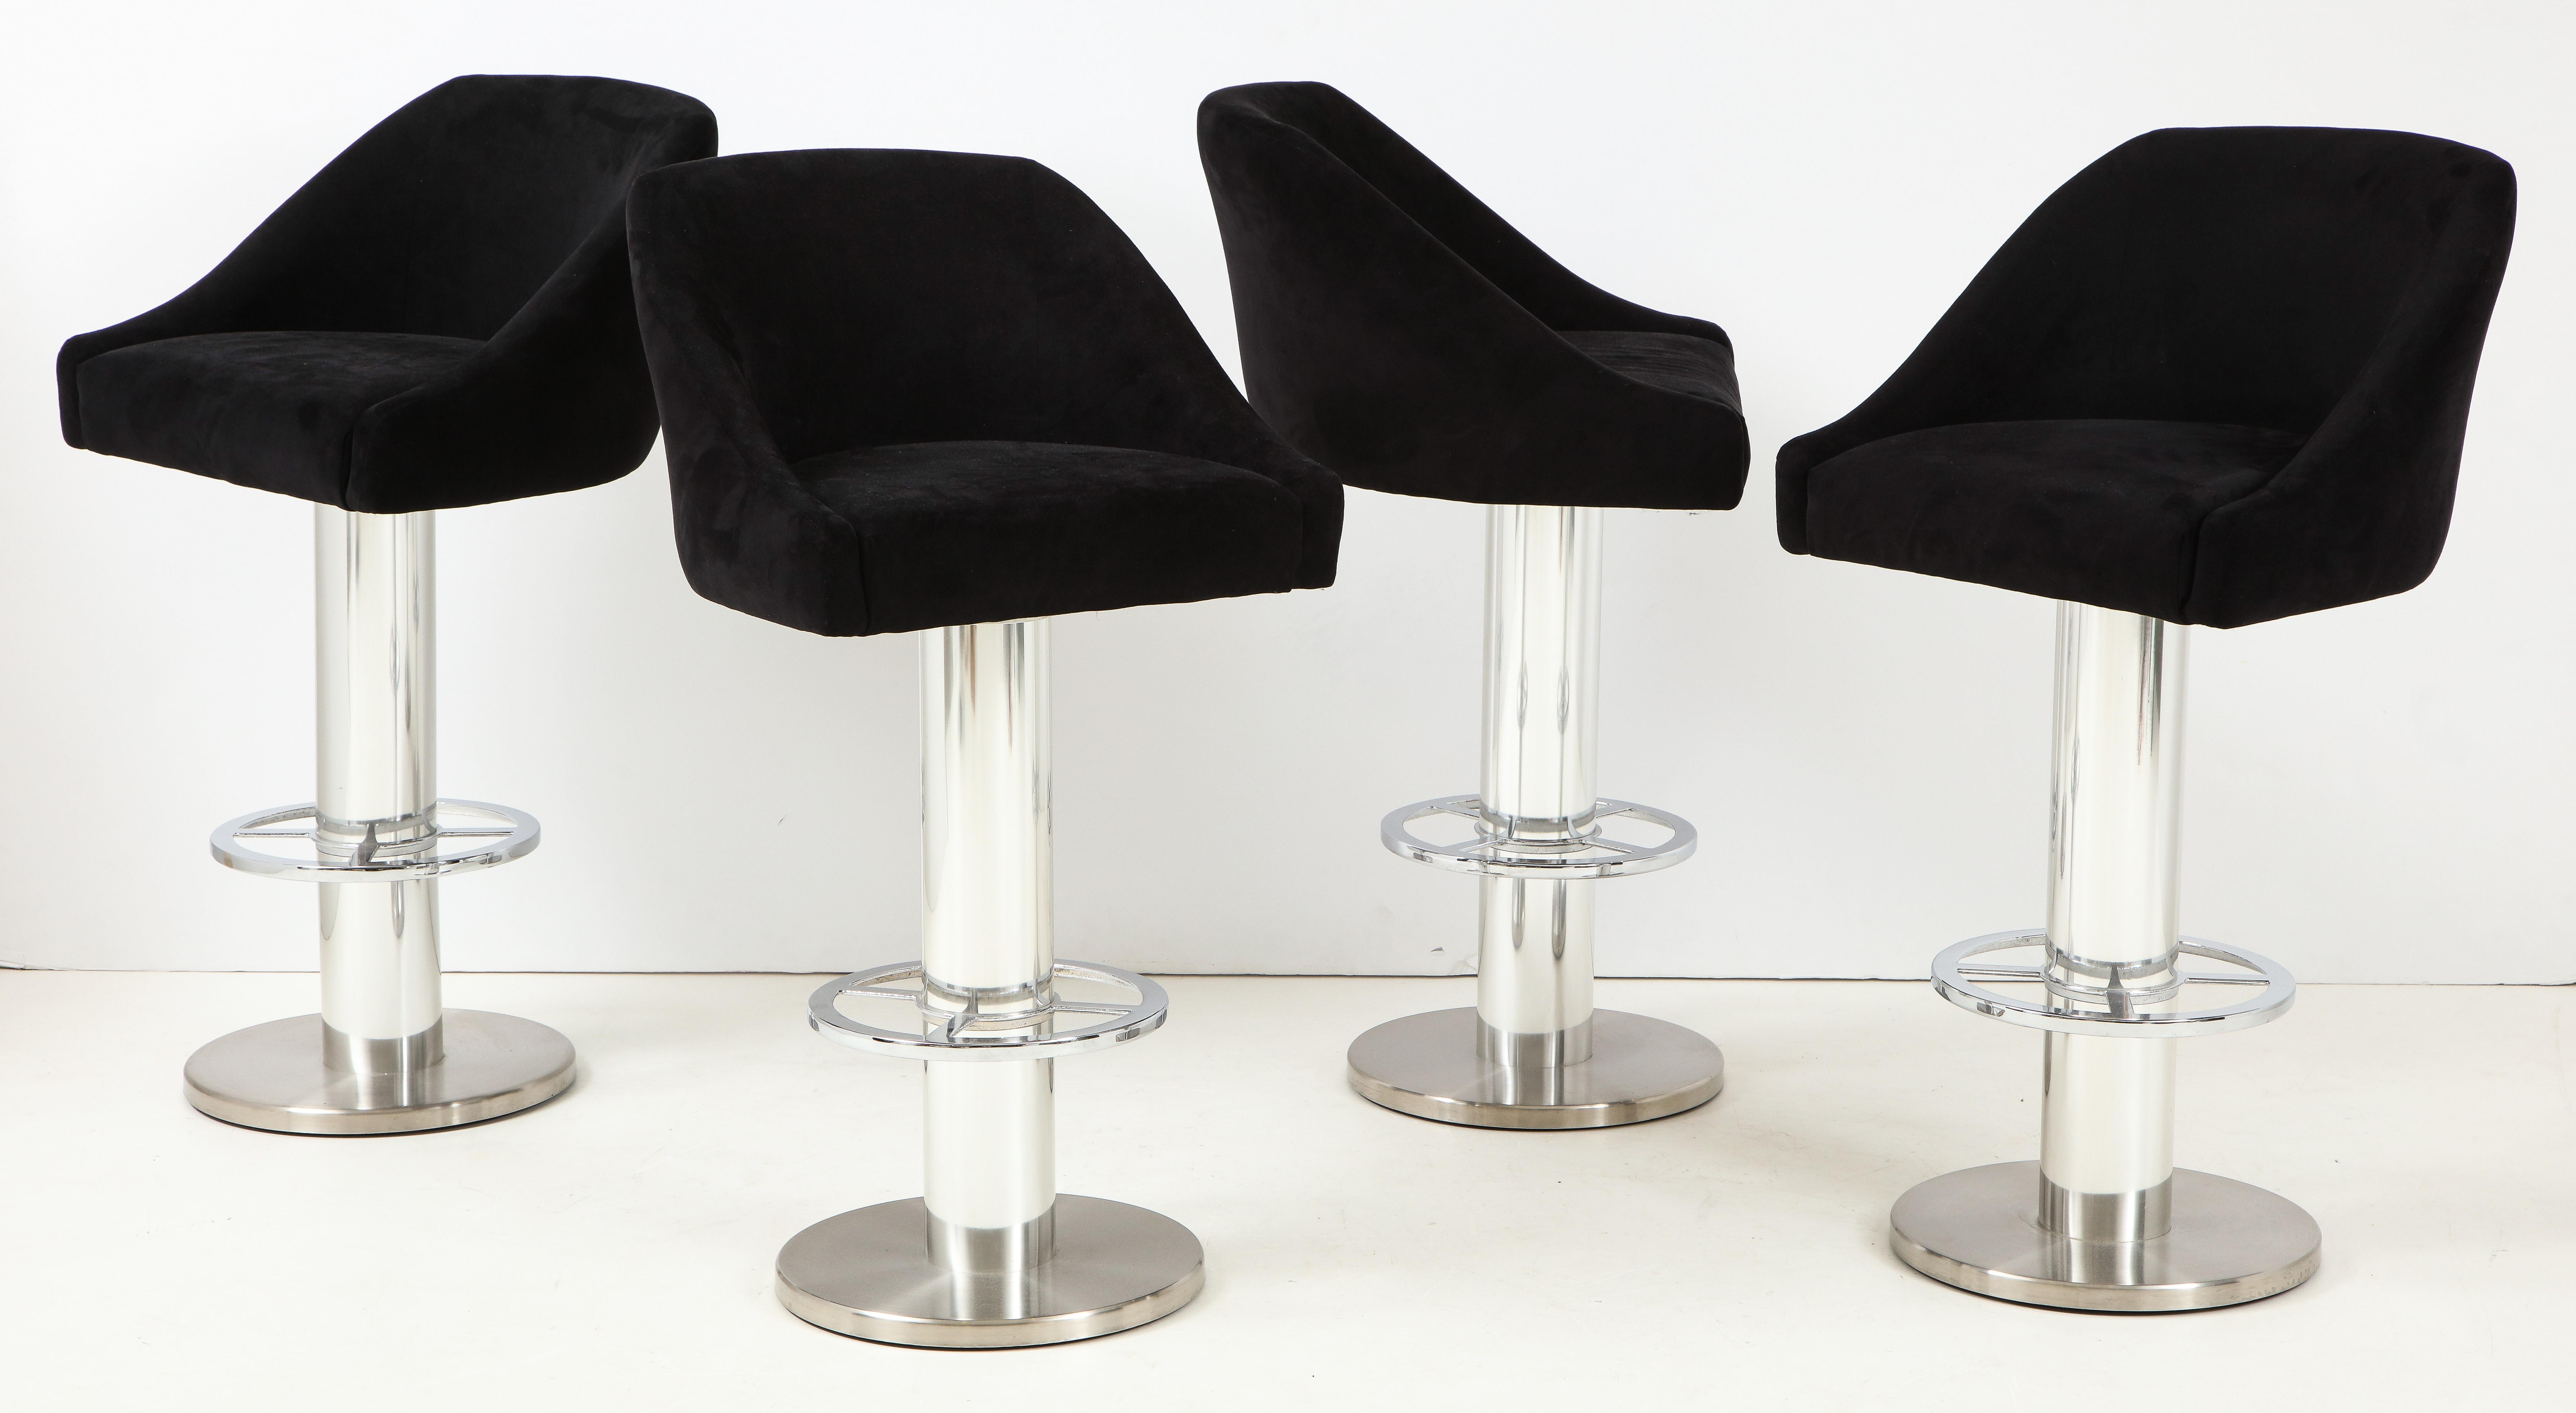 Set of four Design For Leisure barstools in chrome with original black Ultrasuede fabric. Well-made with heavy columnar chrome bases with footrests. Original label dated to 1997. In standout original condition with only minor wear consistent with